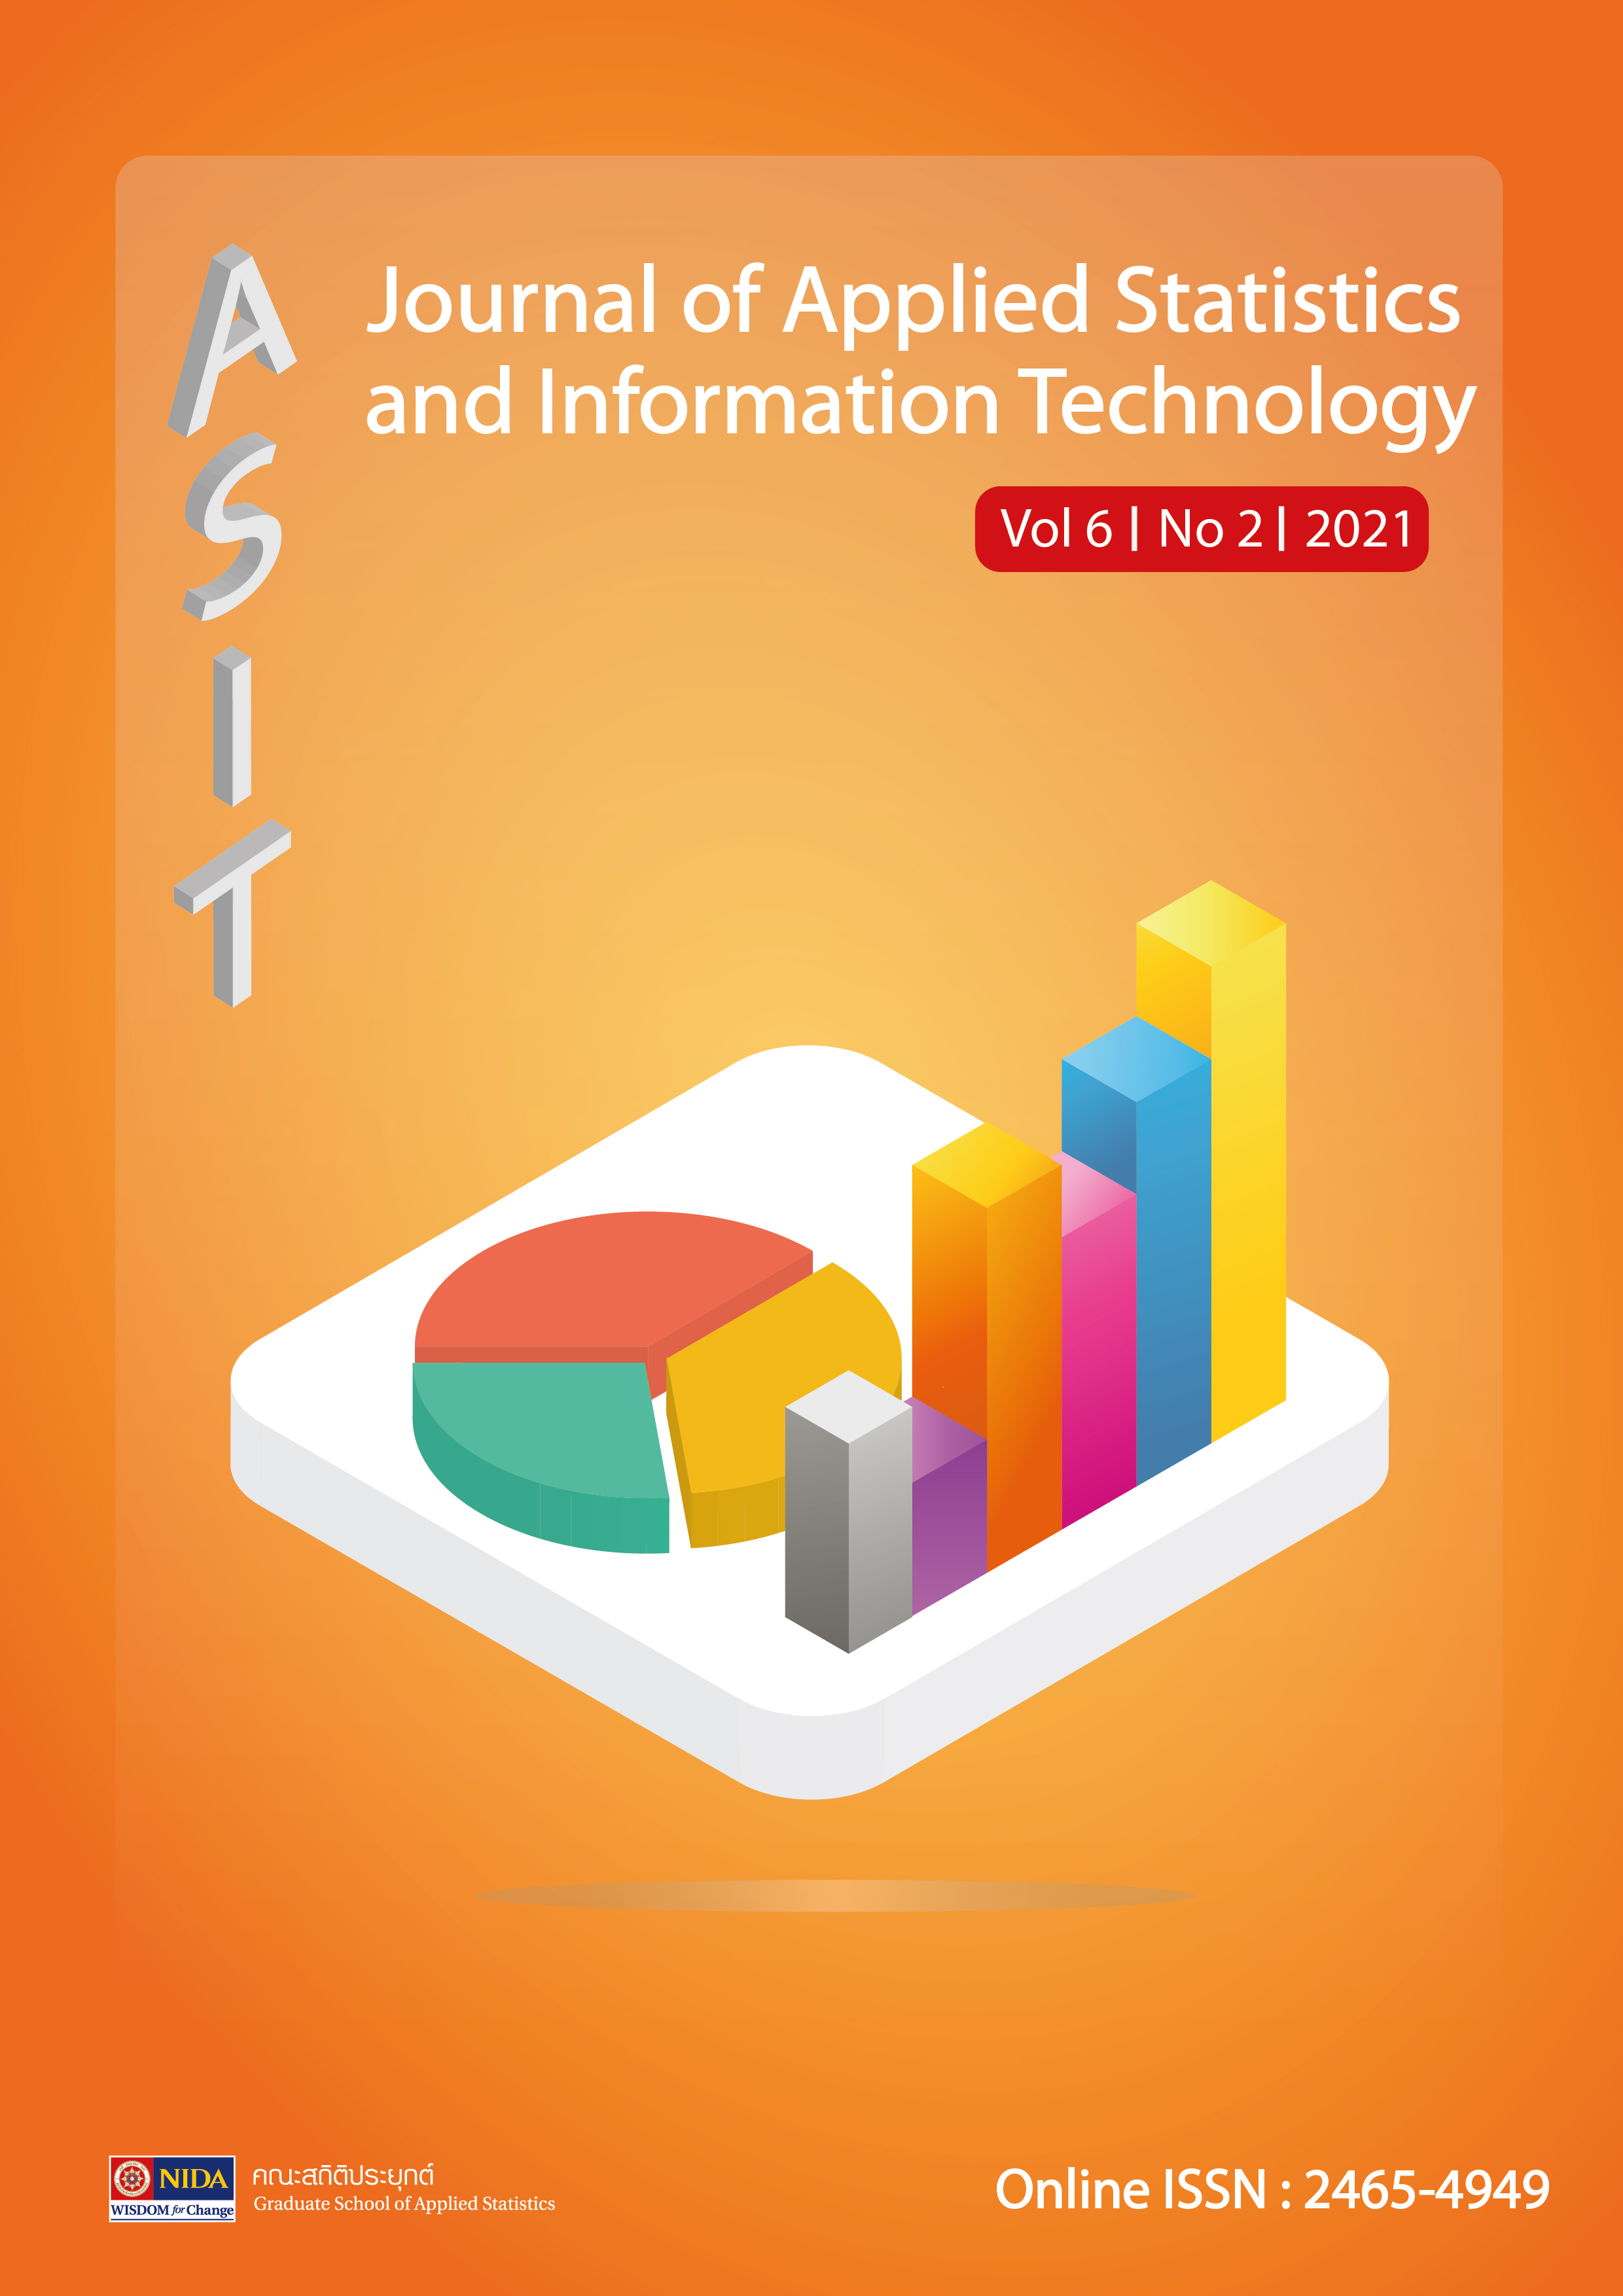 					View Vol. 6 No. 2 (2021): Journal of Applied Statistics and Information Technology Vol. 6 No. 2 (July - December 2021)
				